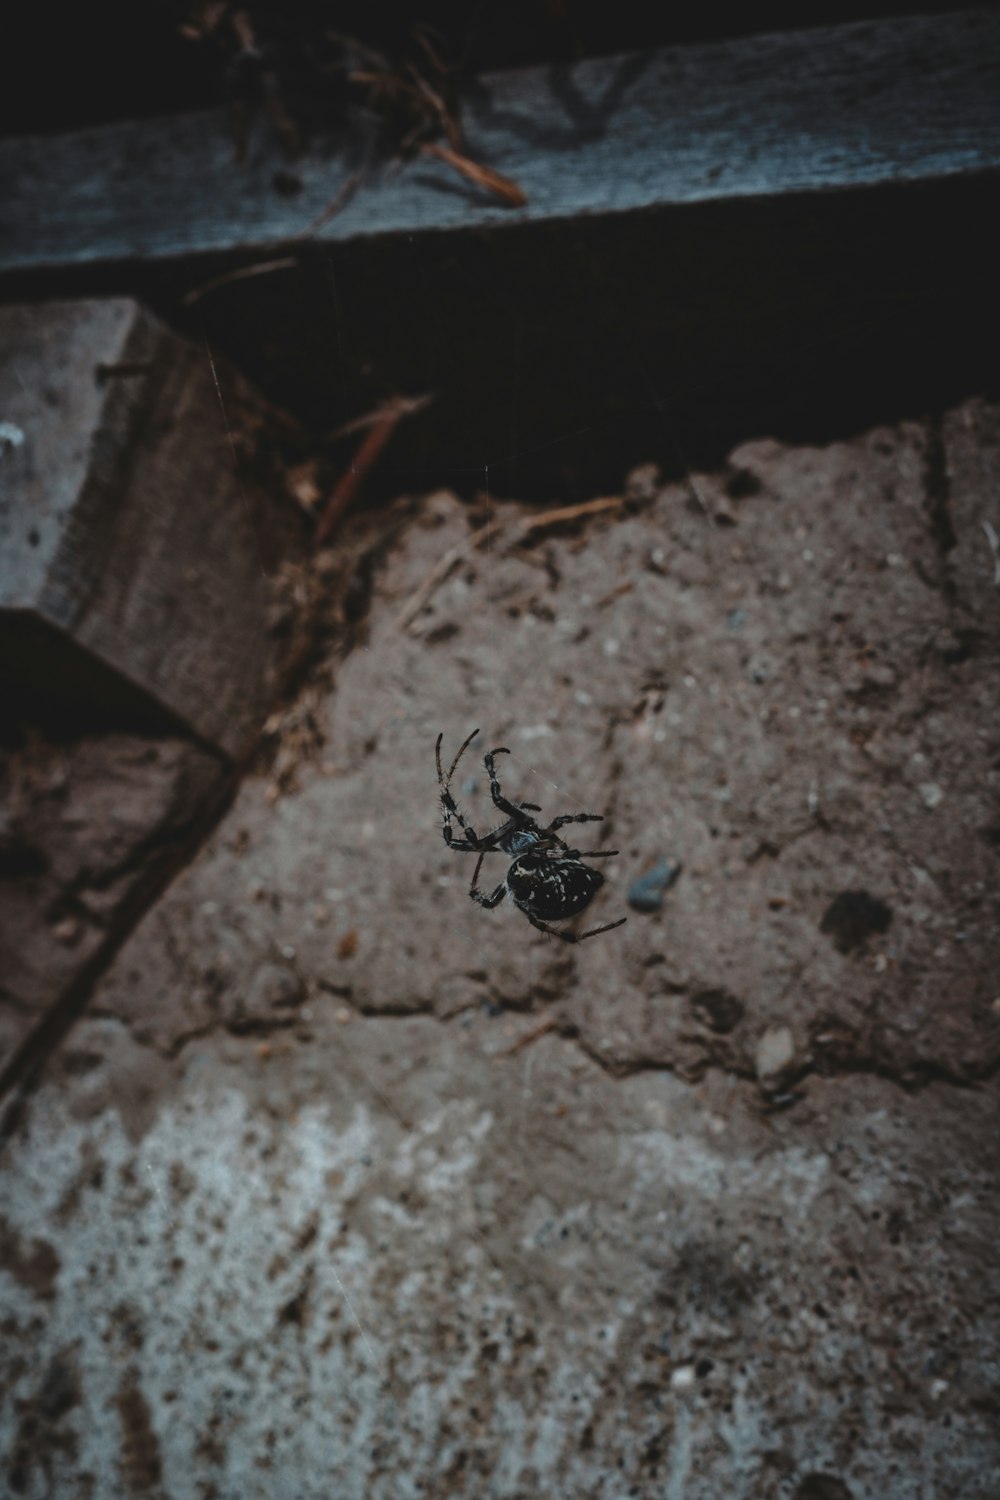 a black and white spider crawling on the ground